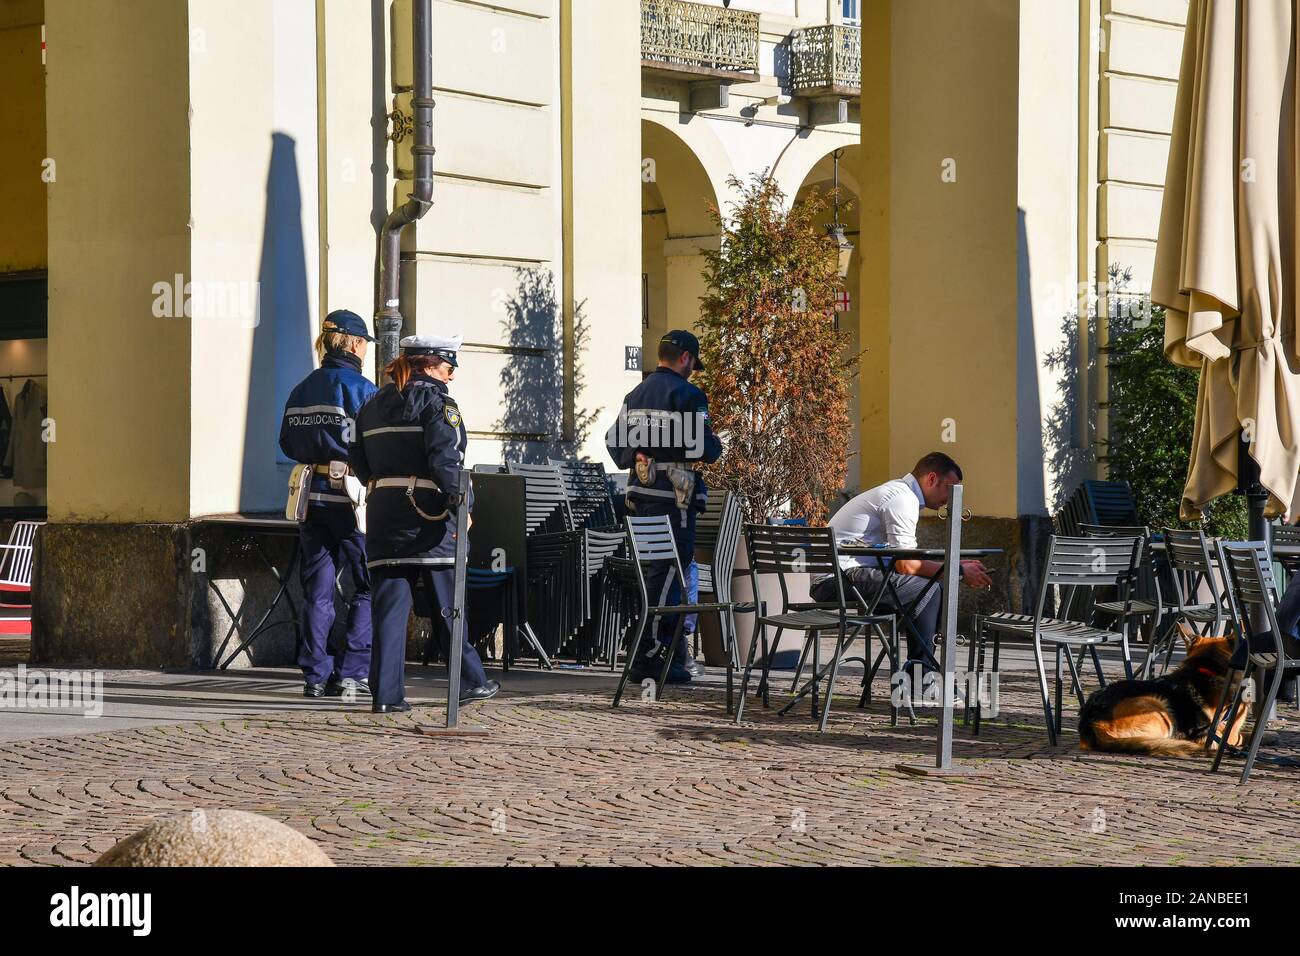 Italian police officers in Vittorio Veneto Square in the historic centre of Turin walking next to an outdoor café in a sunny day, Piedmont, Italy Stock Photo